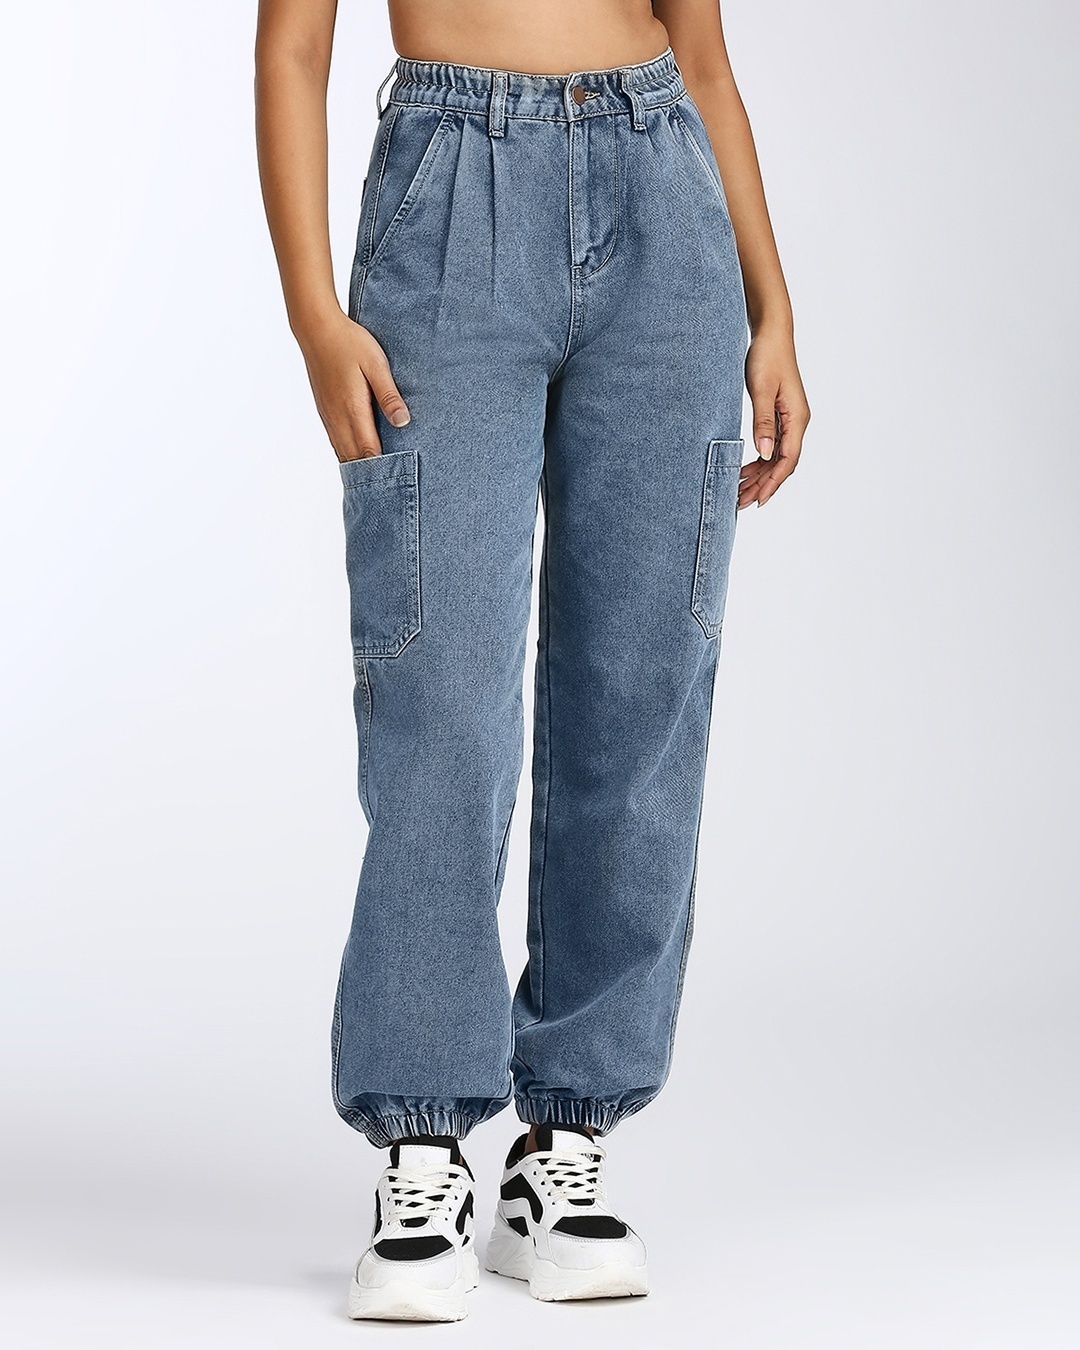 Women's Mid Blue Relaxed Fit Cargo Jogger Jeans paired with high ankle shoes